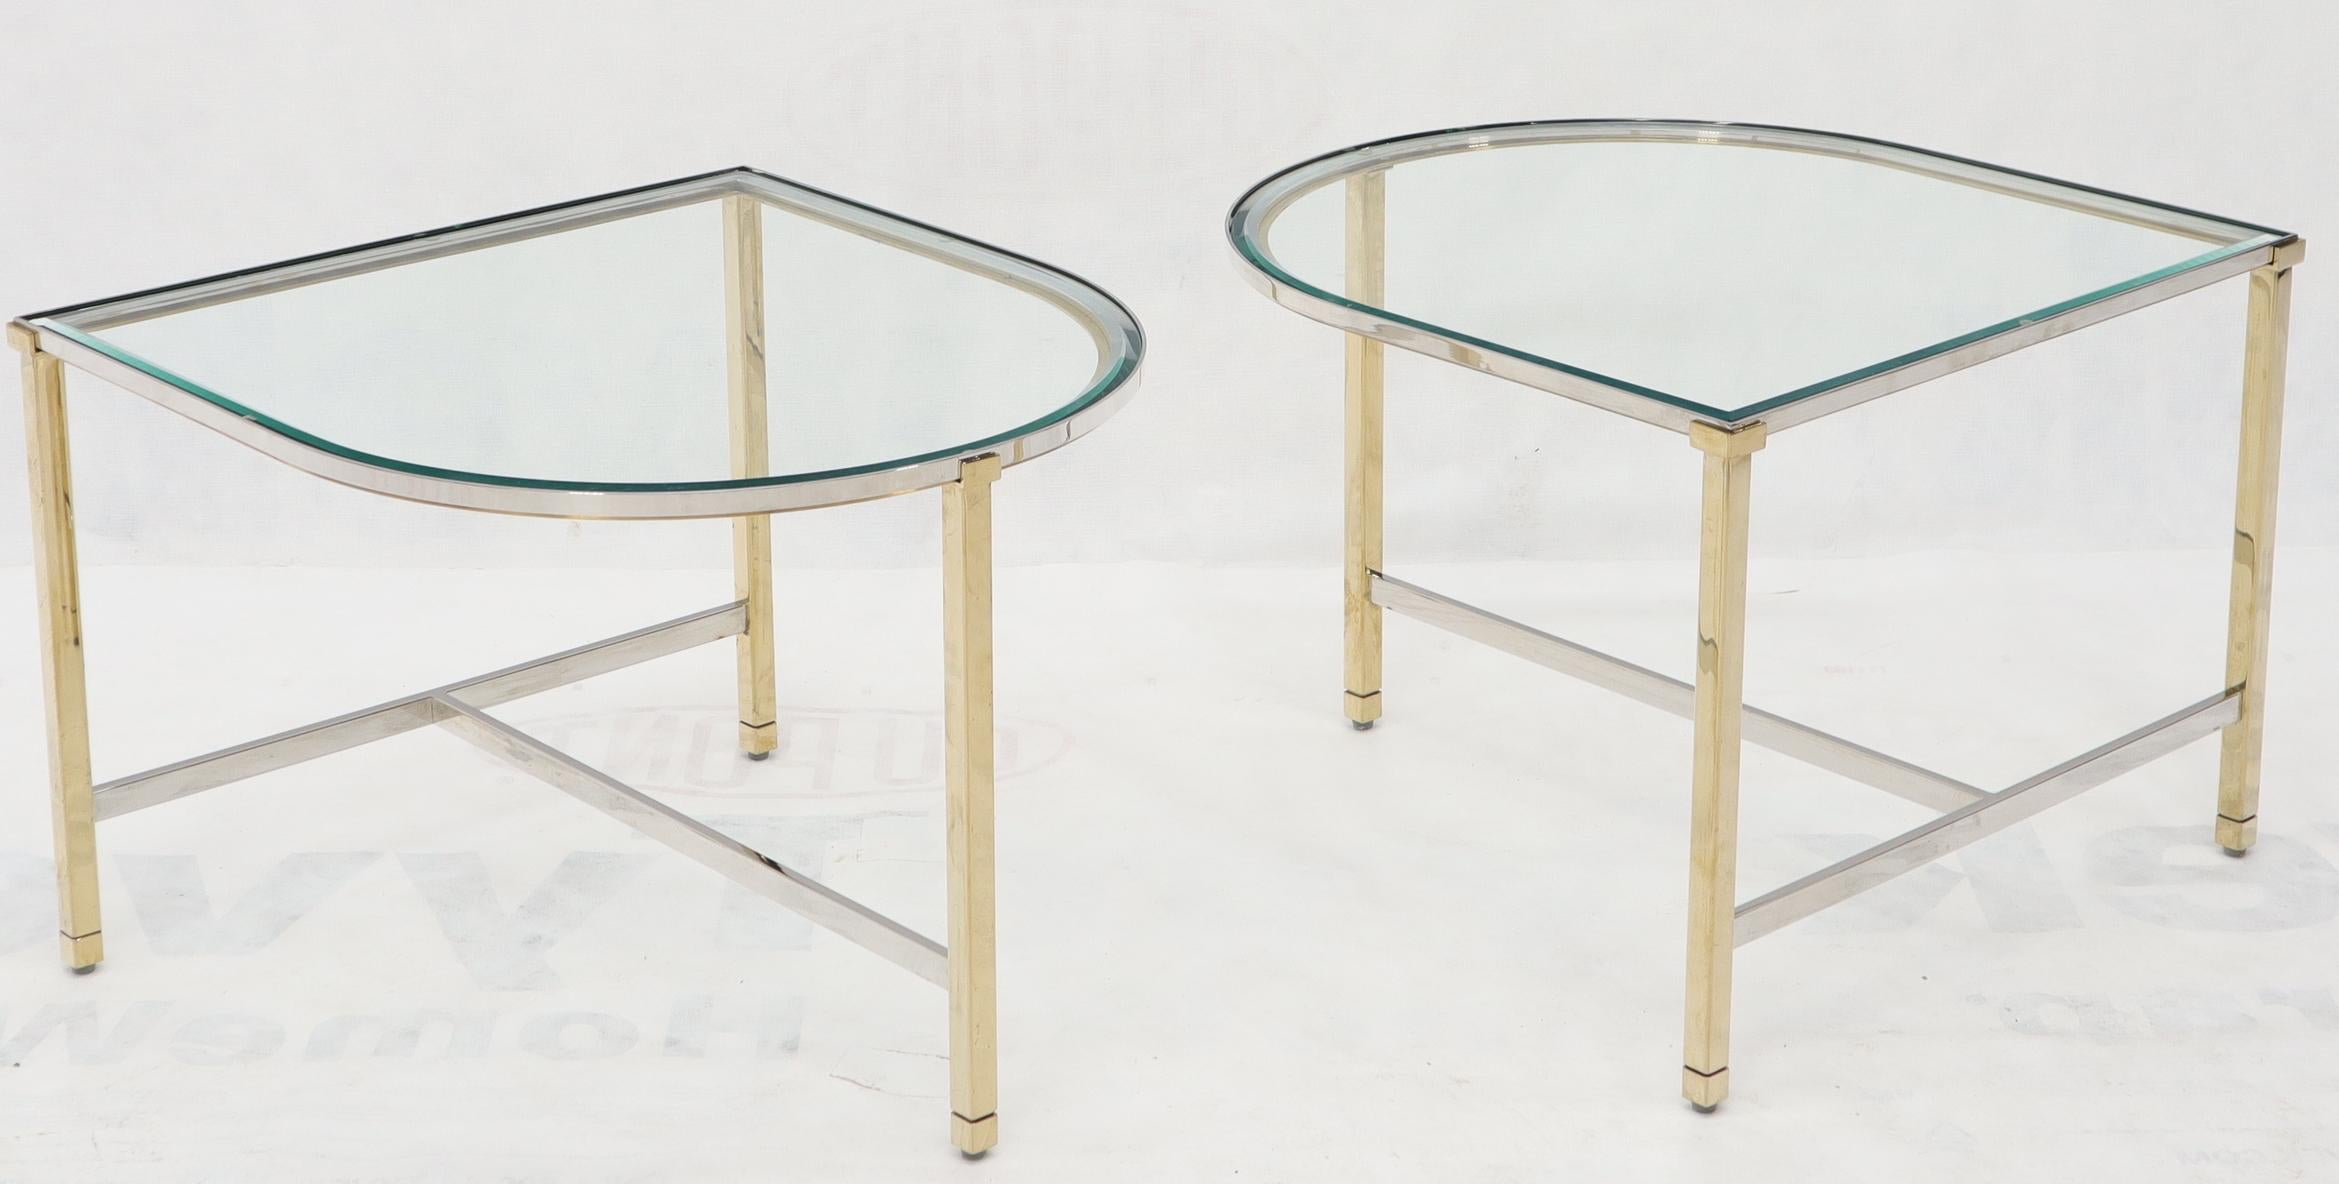 Racetrack Oval Shape Two Pieces Coffee Table In Excellent Condition For Sale In Rockaway, NJ